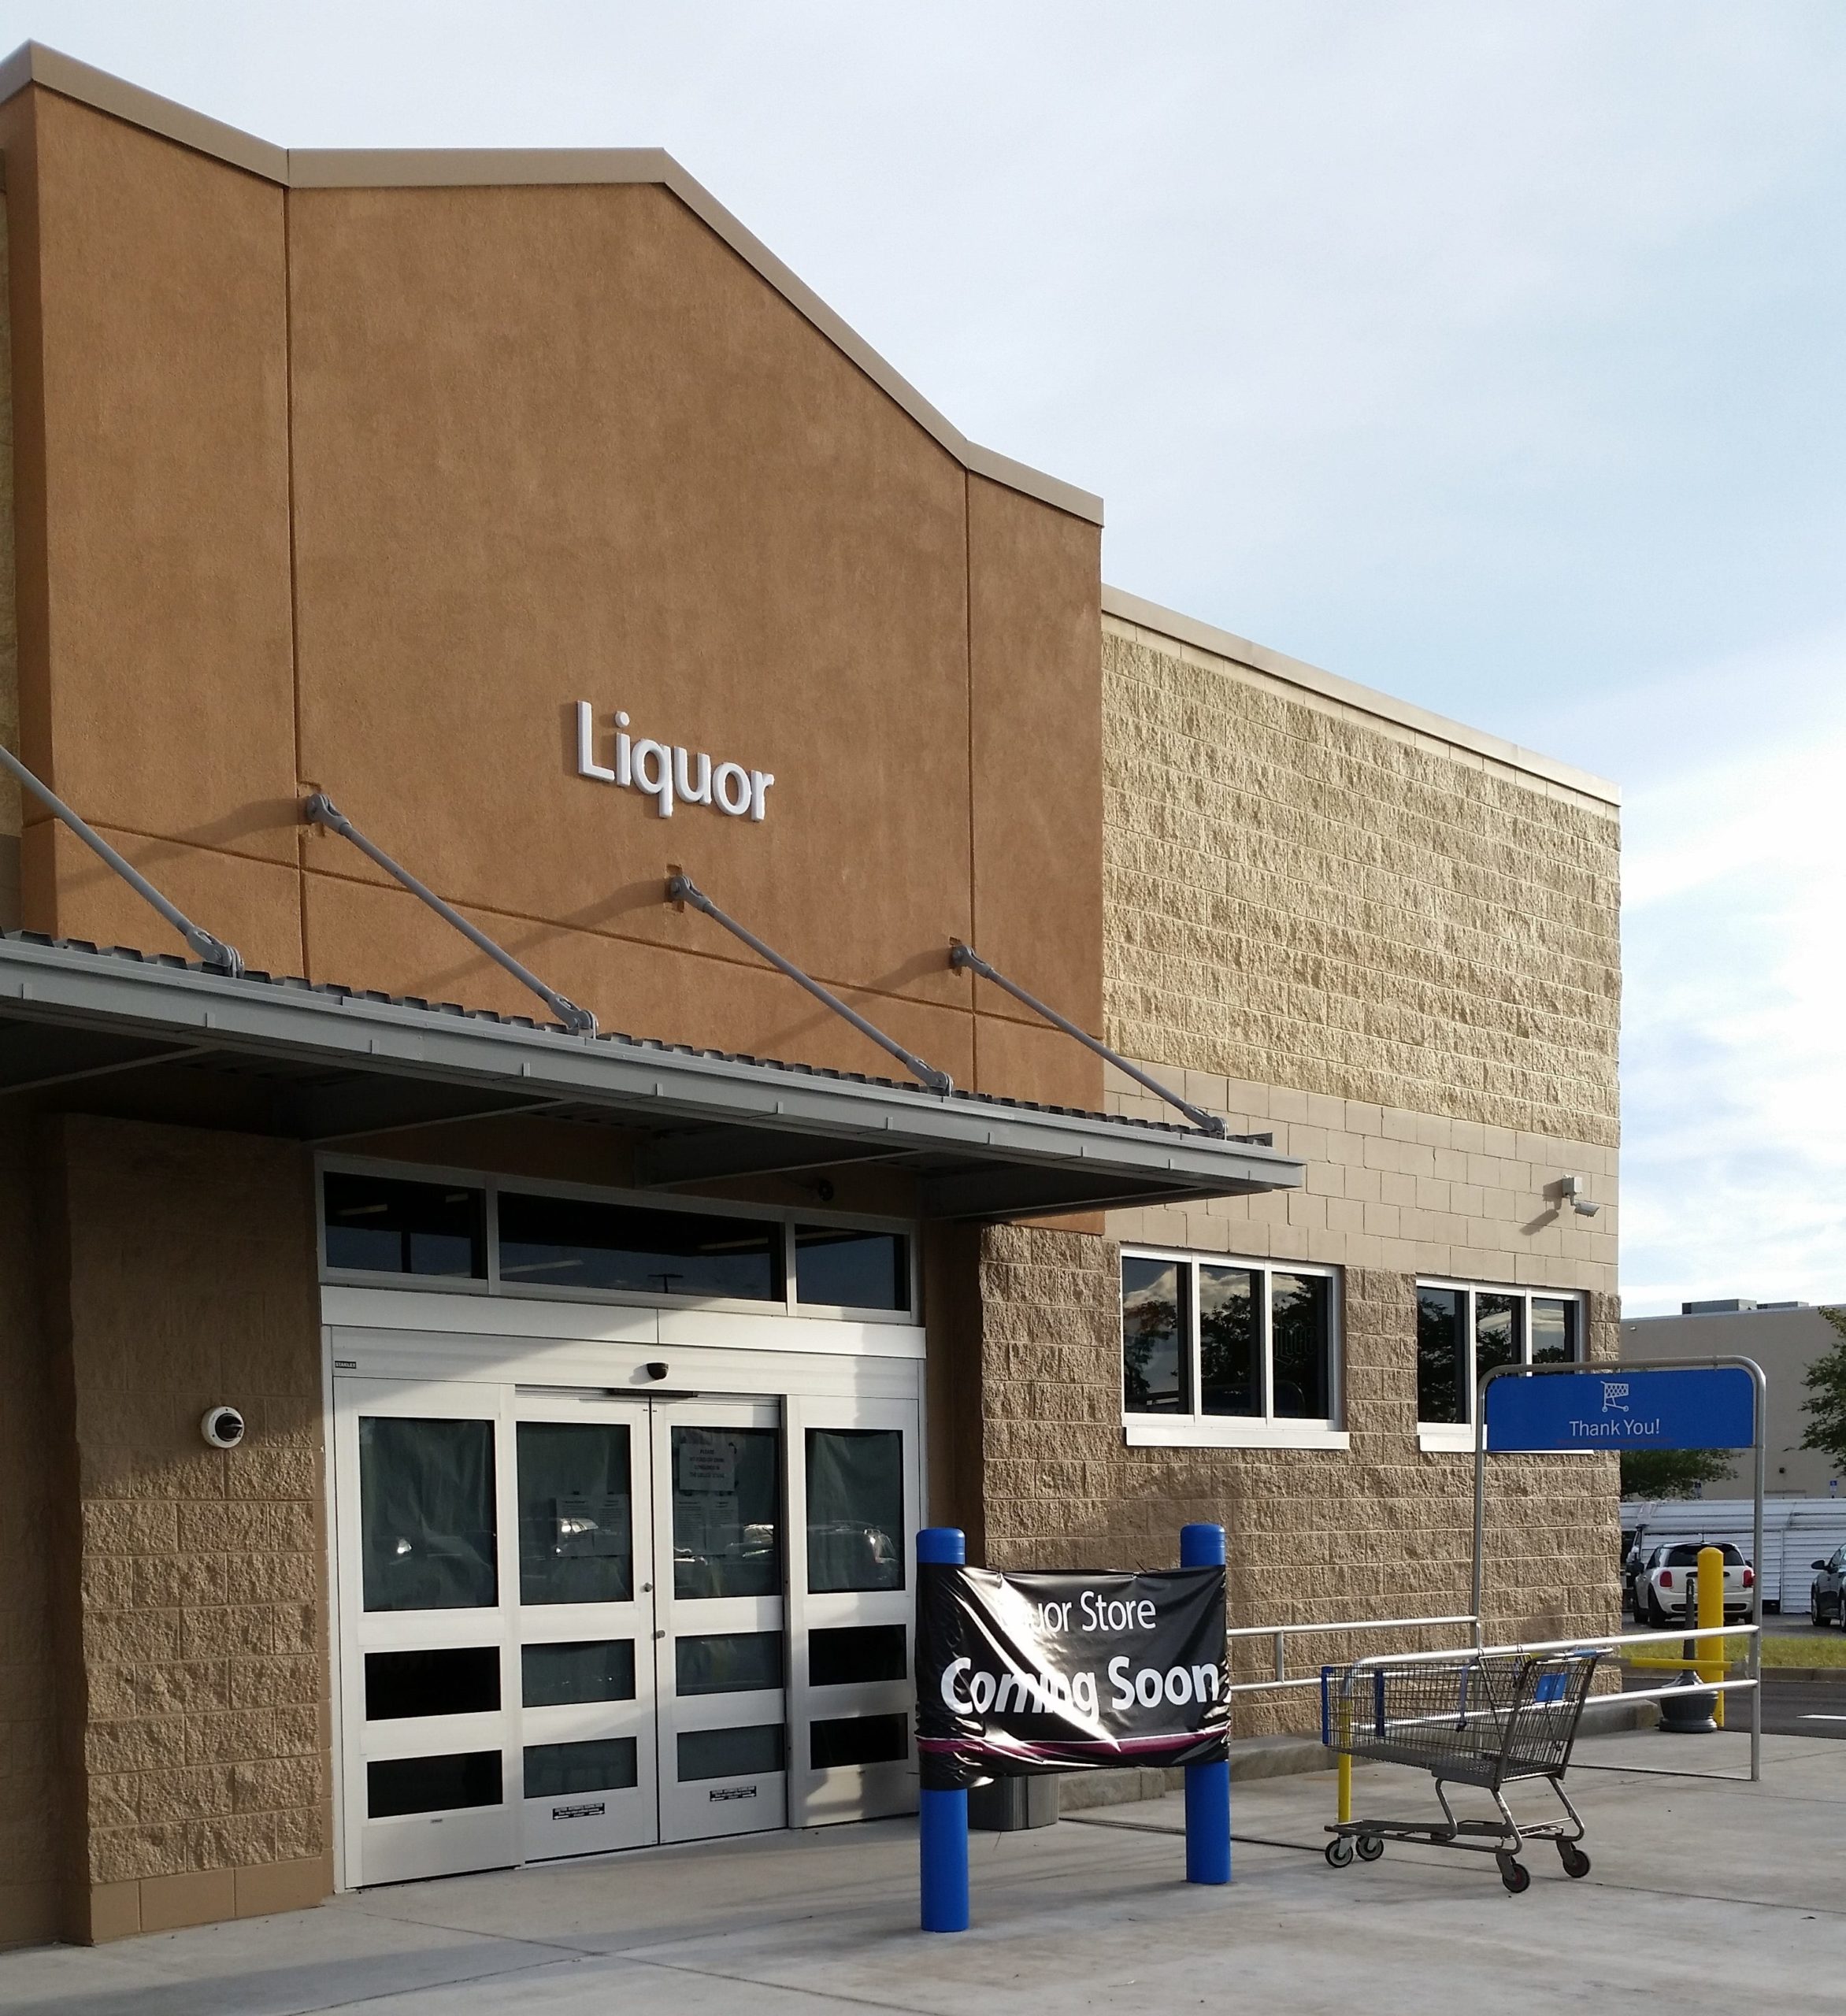 The Walmart Supercenter, located in Pace off U.S. Hwy. 90, will open the doors to their liquor store this weekend. The 3,900 square foot addition to the store, will open on Friday and be open for sales on a 9 a.m. to 9 p.m. basis, Monday through Saturday. 
Â“The expansion will give us the ability to provide a broader selection of grocery items and adult beverages to our customers to better meet their needs,Â” said Amanda Henneberg, a spokesperson for Walmart.